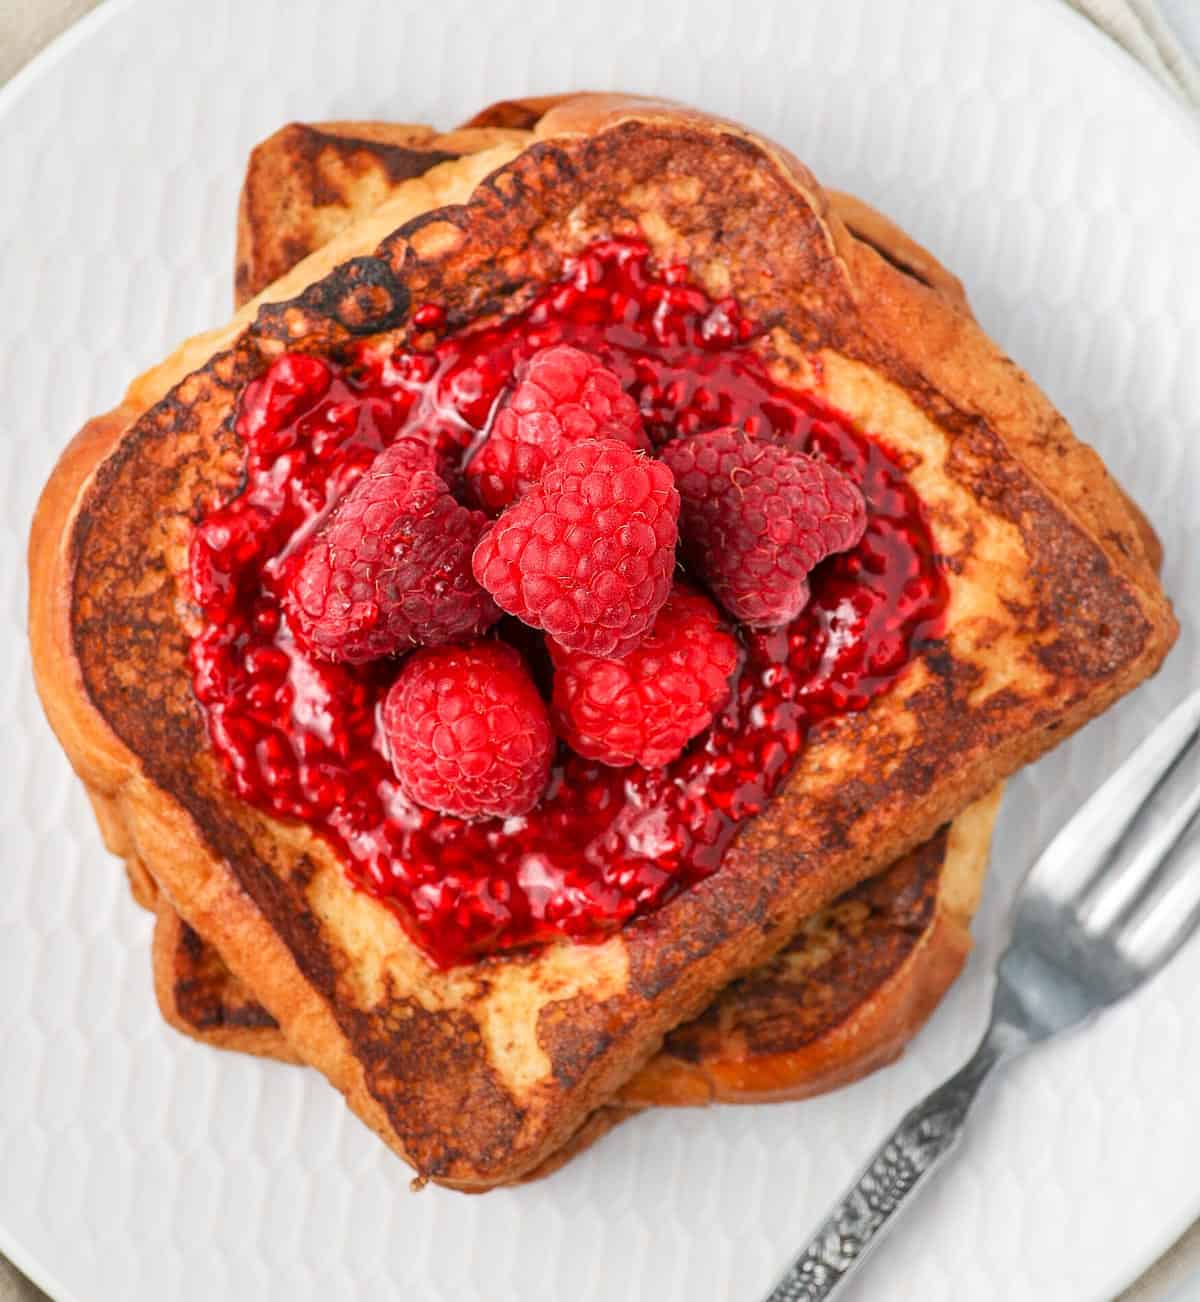 Sauce and fresh raspberries over french toast.